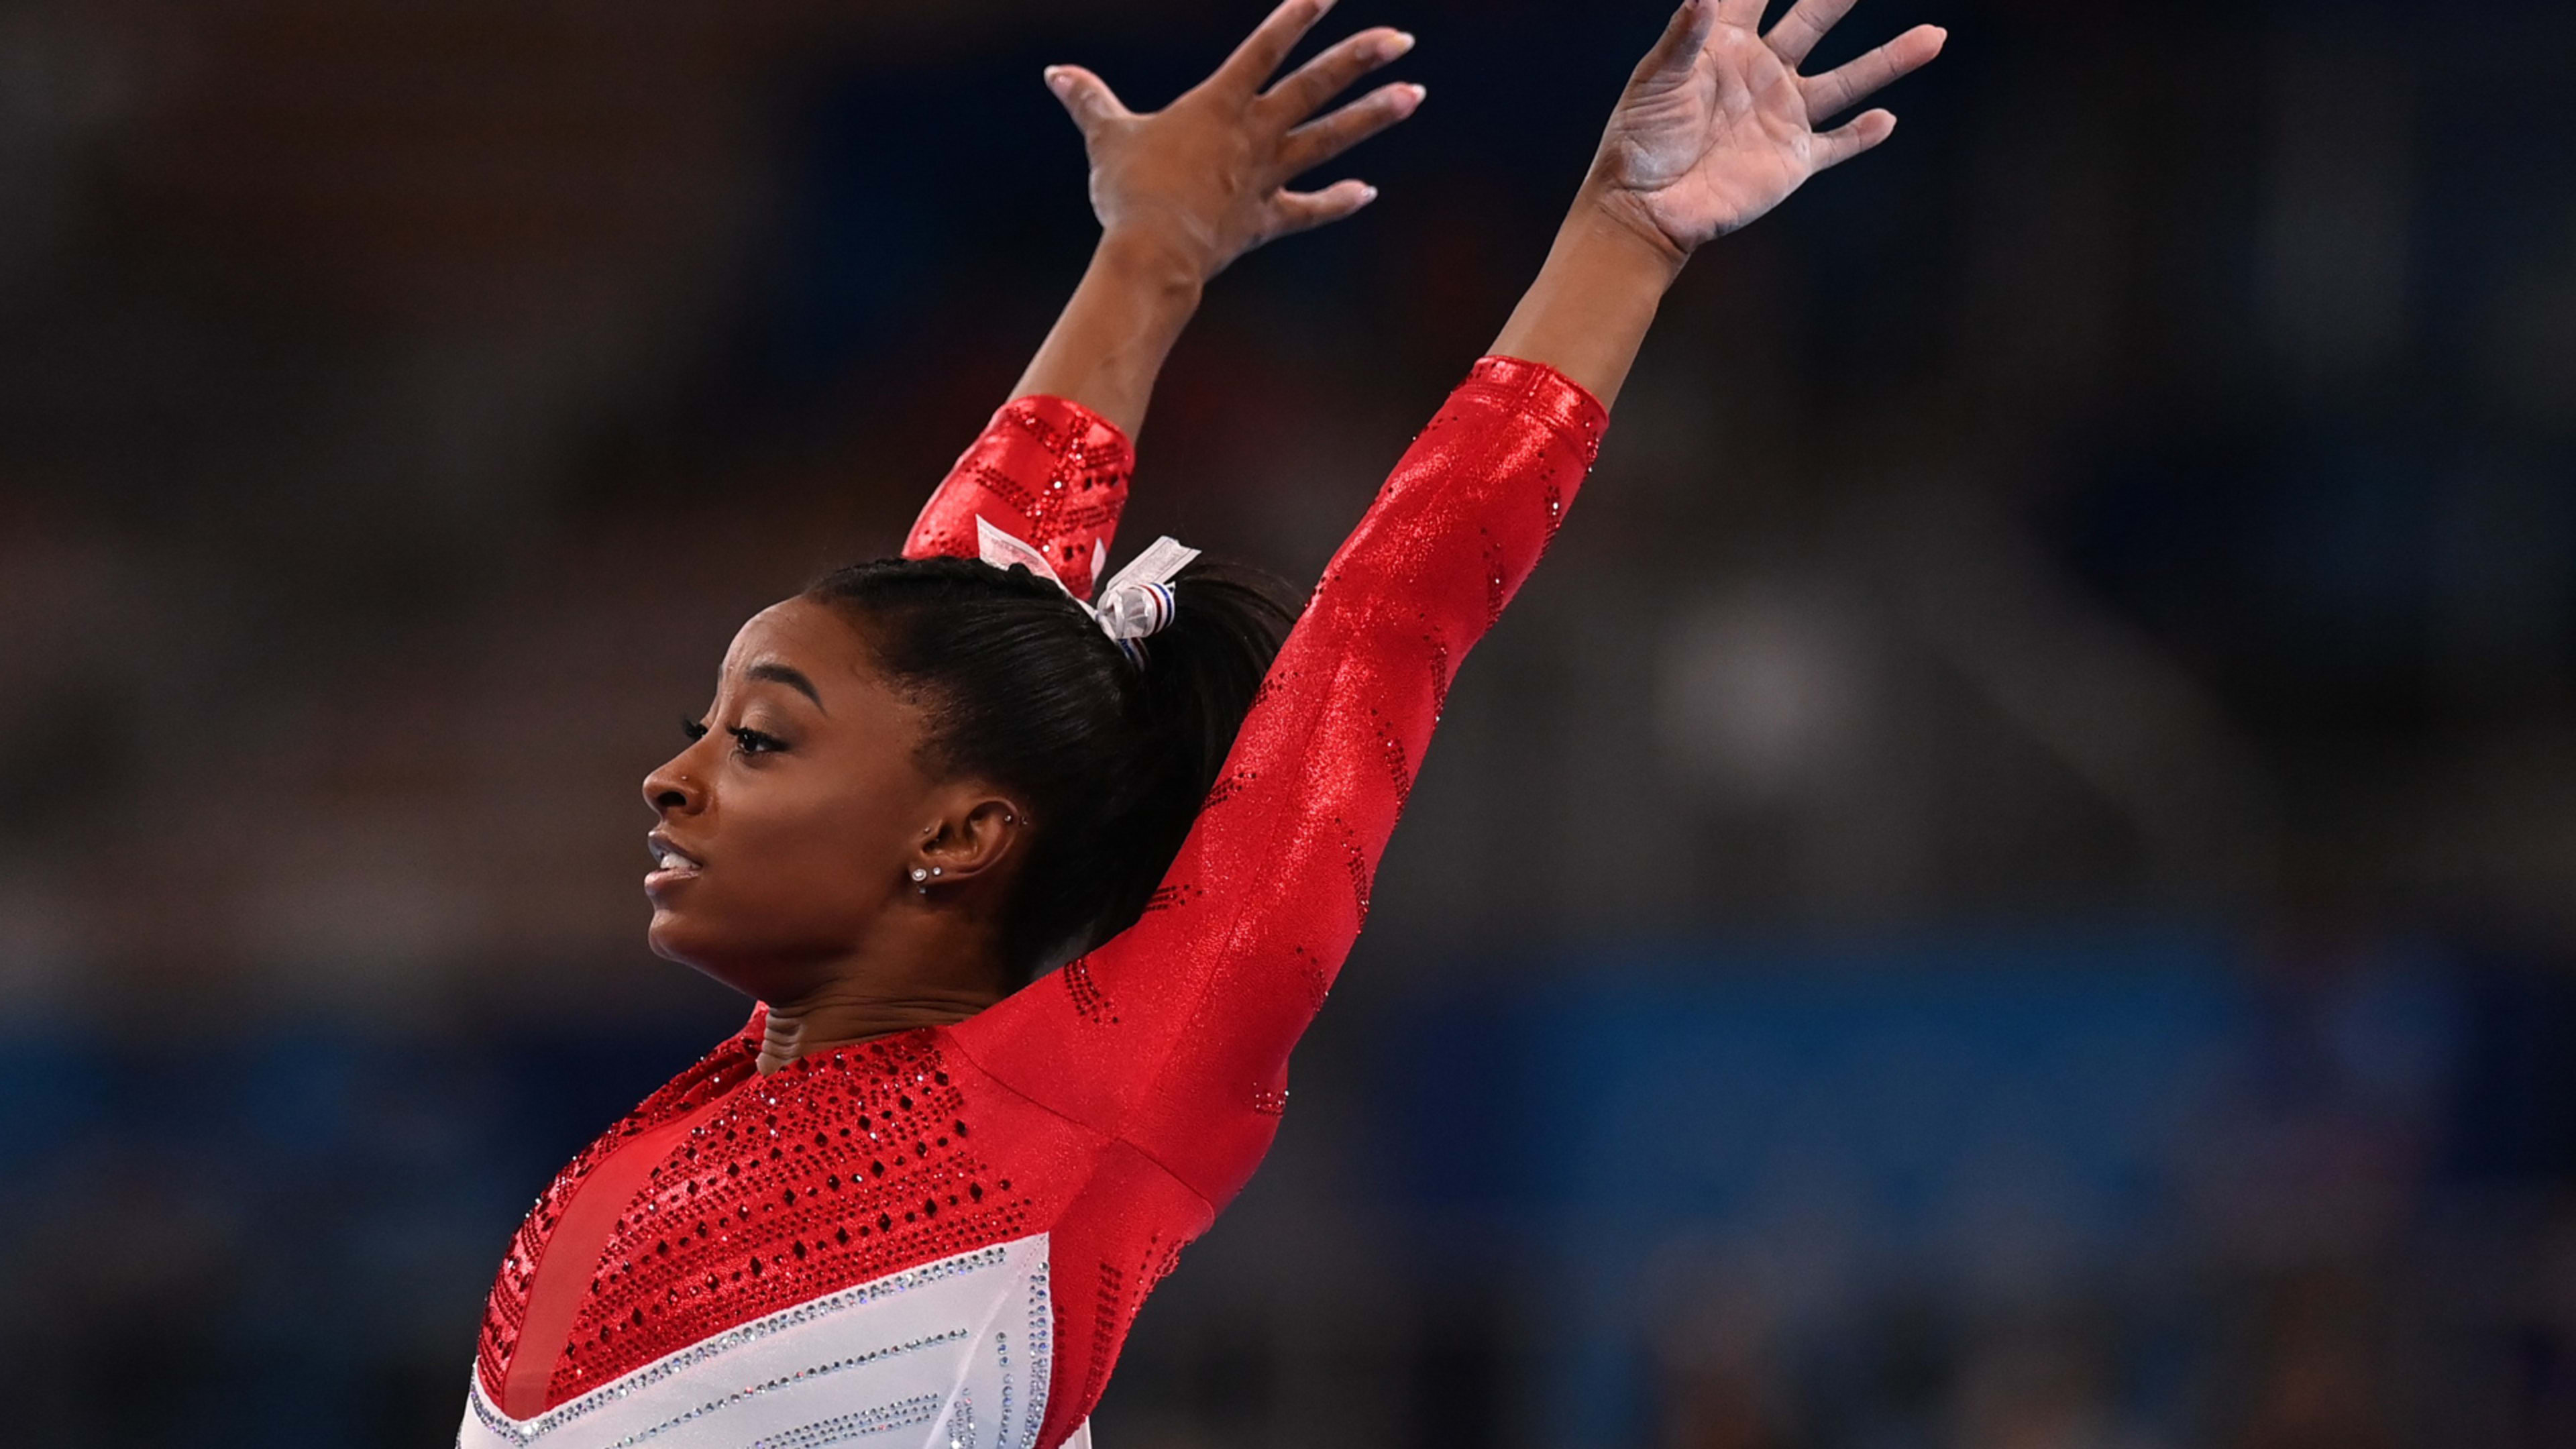 What leaders can learn from Simone Biles’ Olympics exit